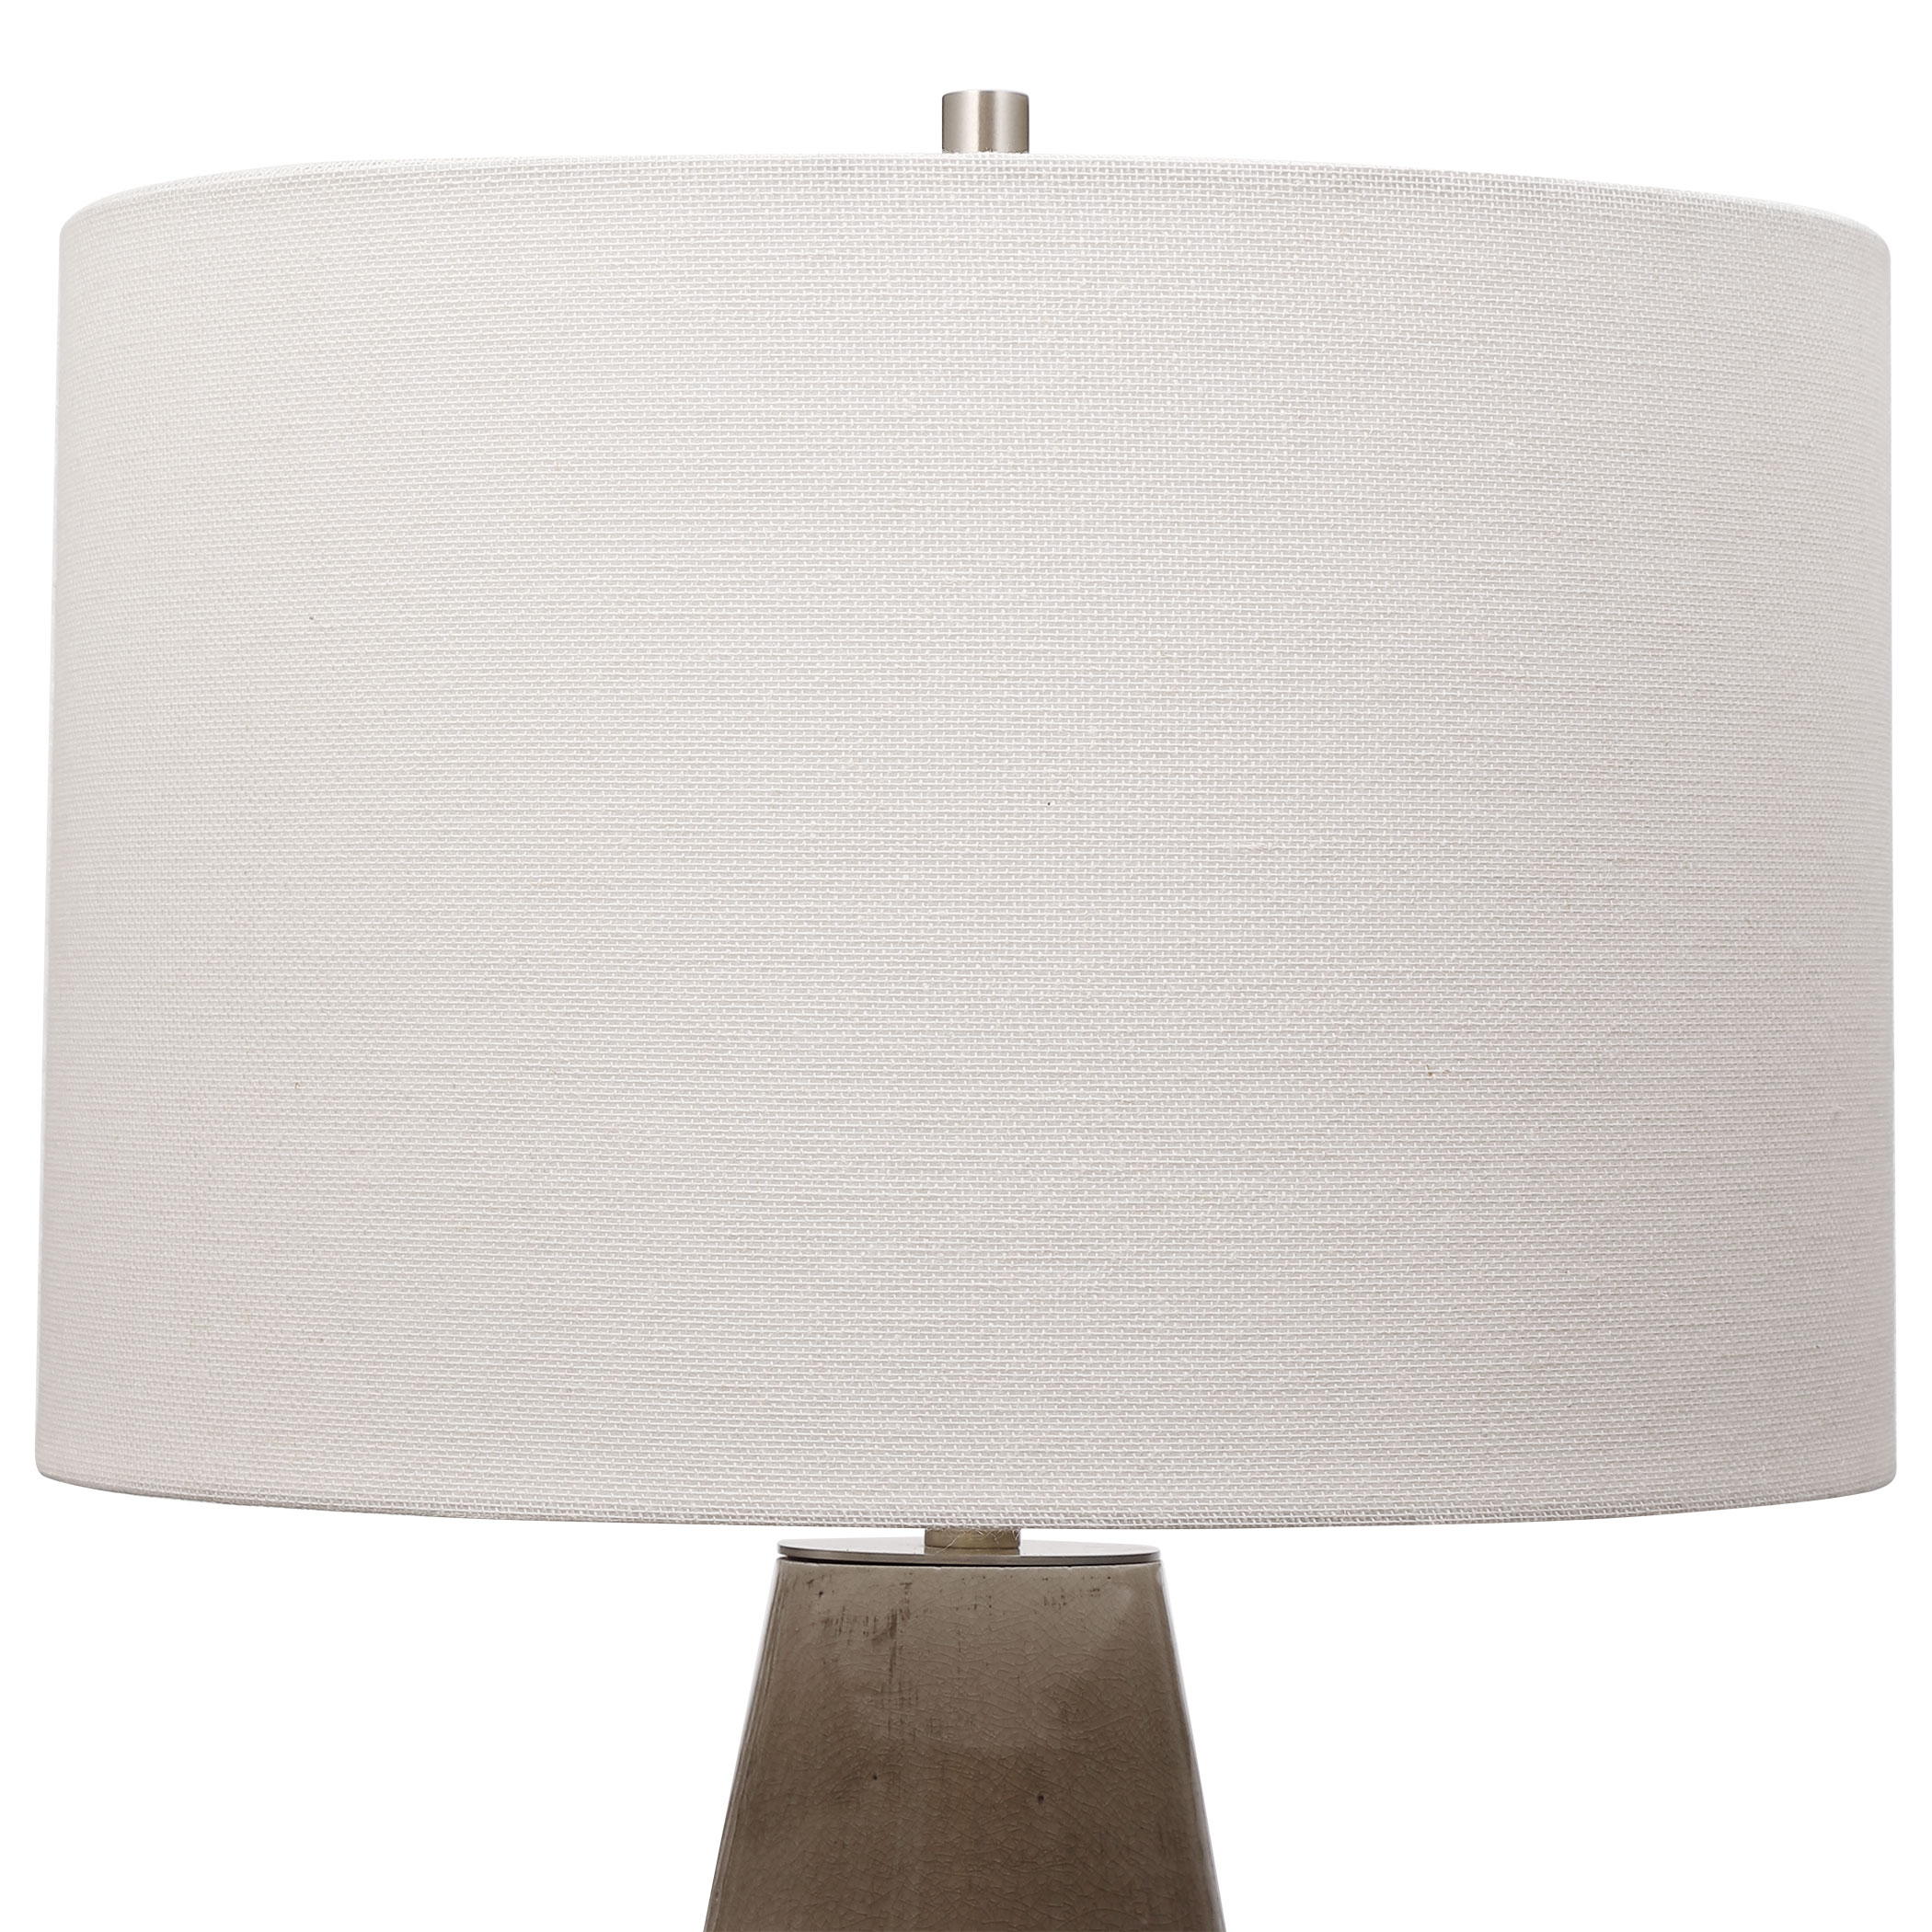 Volterra Taupe-Gray Table Lamp - Image 3